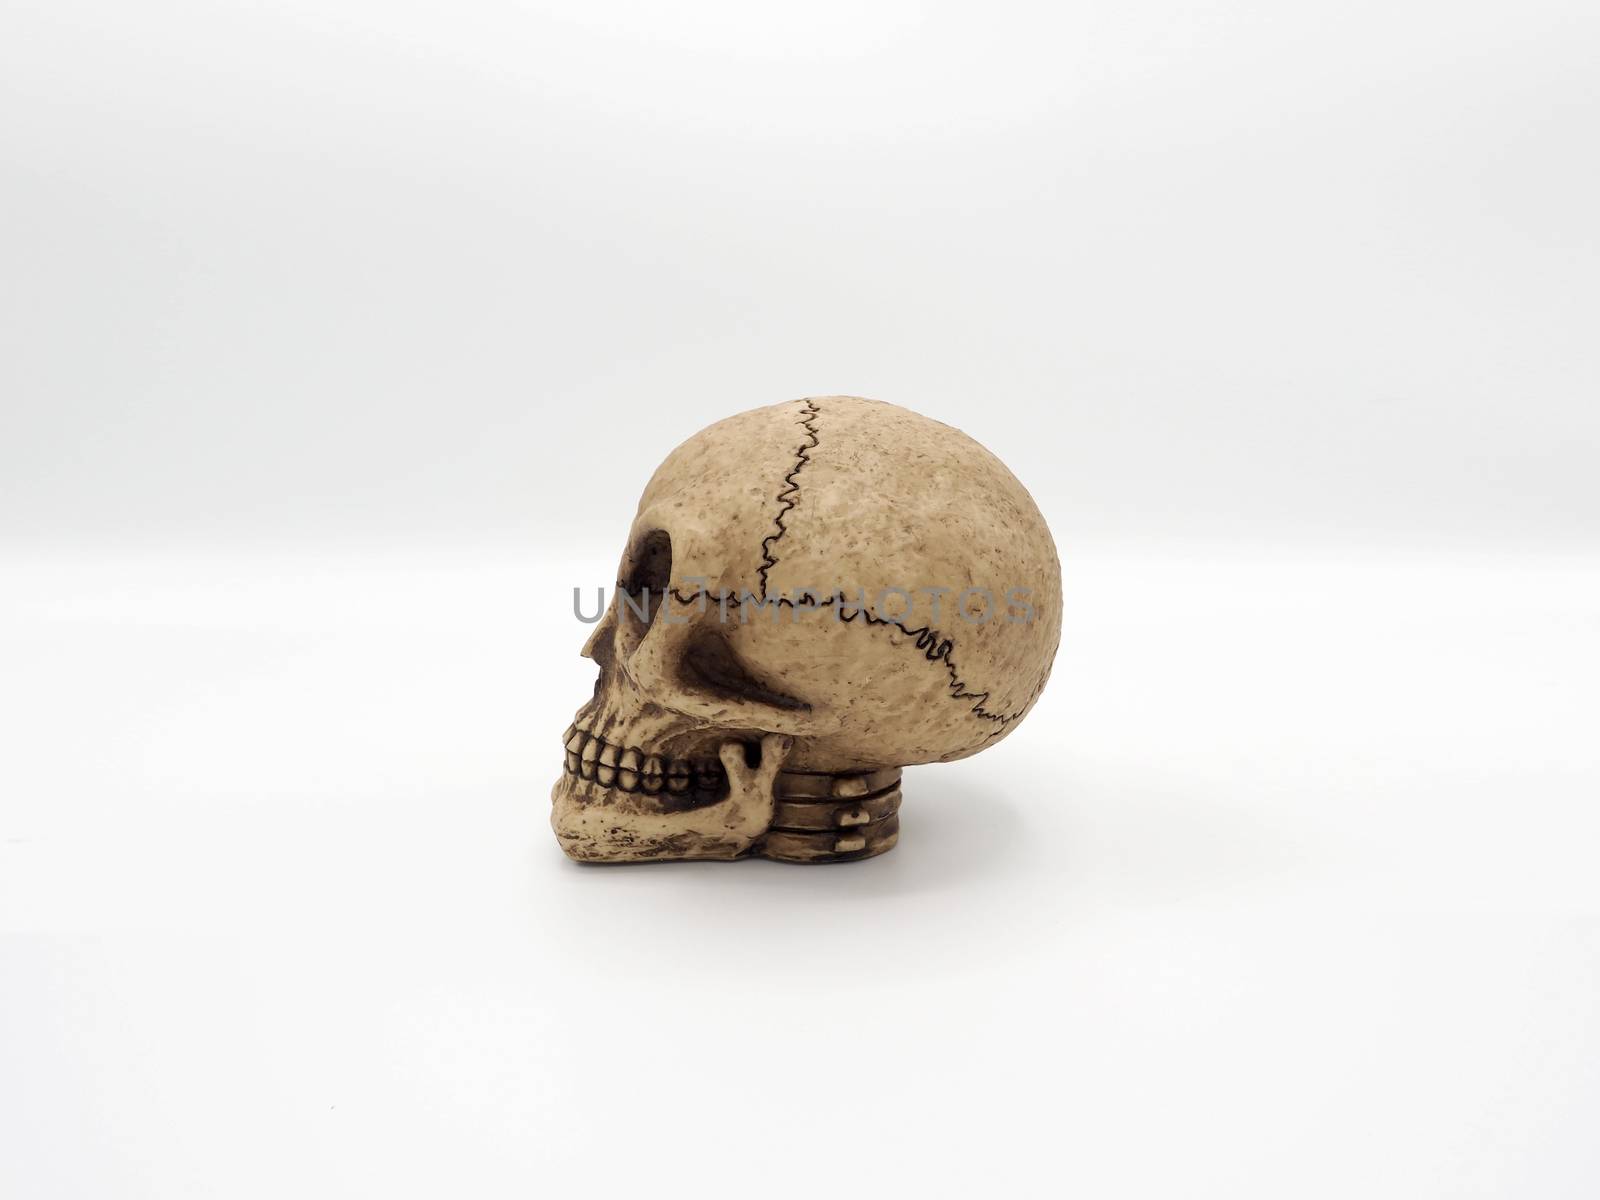 Alien skull toy model which made from plastic racin by hand made and white background studio shot and isolated.